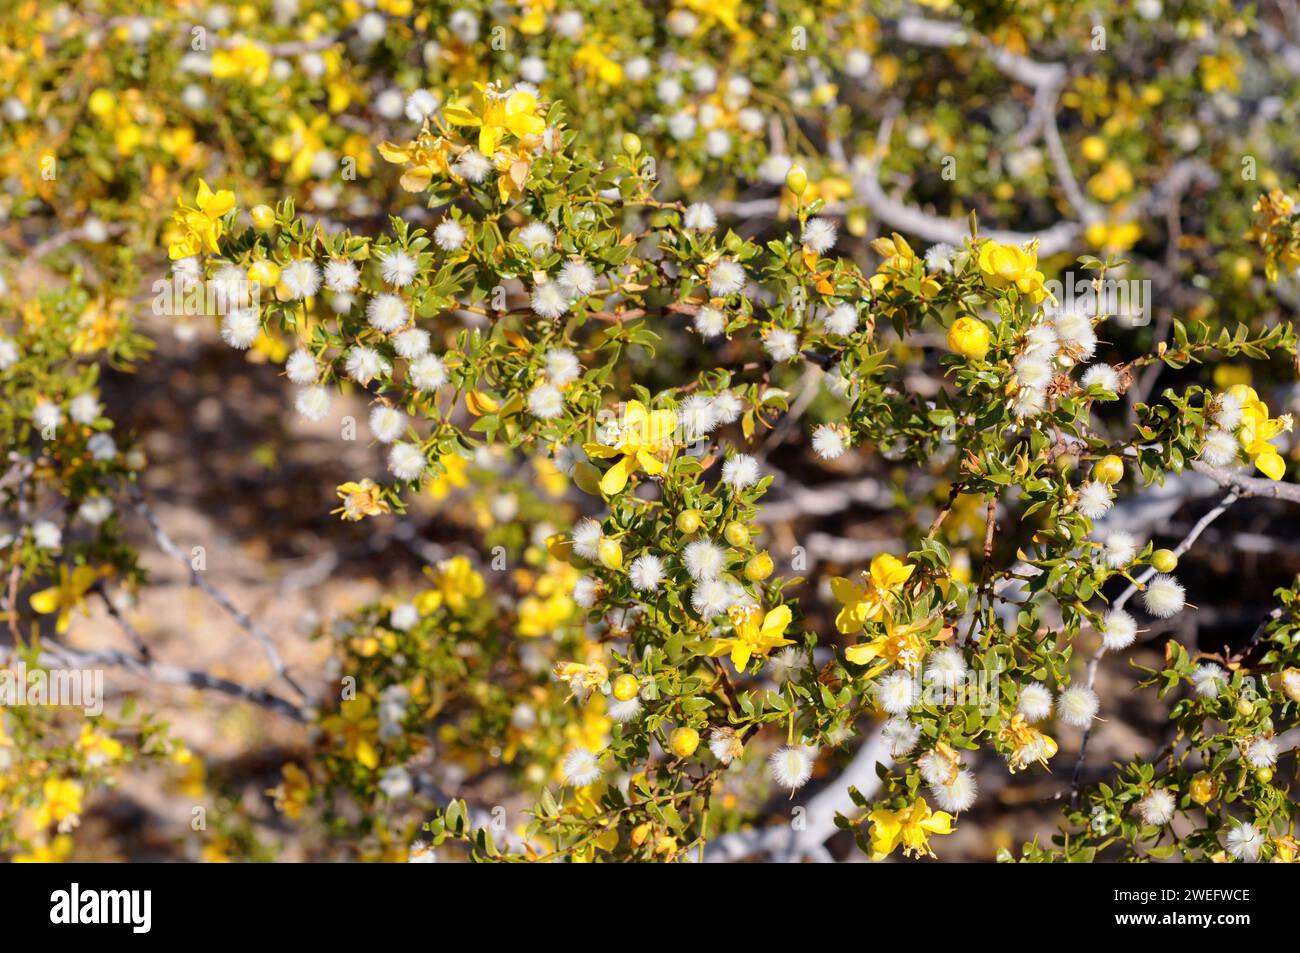 Creosote bush (Larrea tridentata) is a medicinal evergreen shrub native to western USA deserts and north Mexico. Flowers and fruits detail. This photo Stock Photo